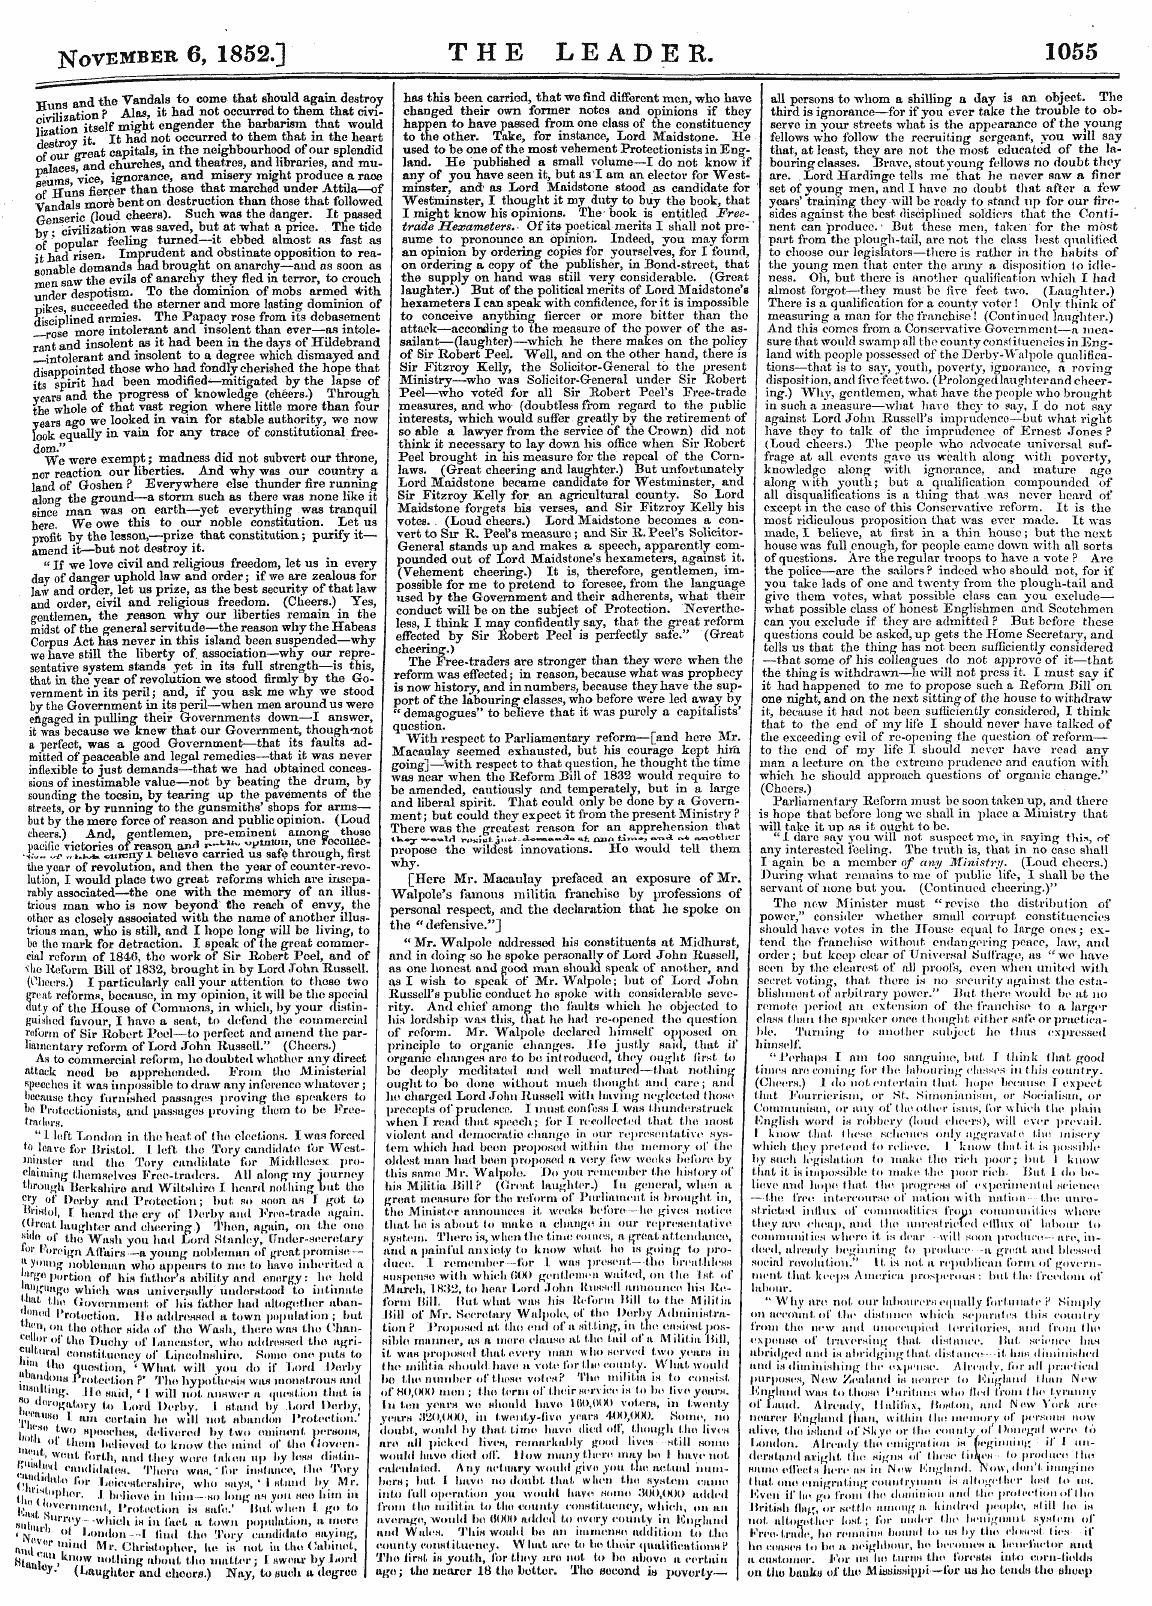 Leader (1850-1860): jS F Y, Country edition - November 6, 1852.] The Leader. 1055